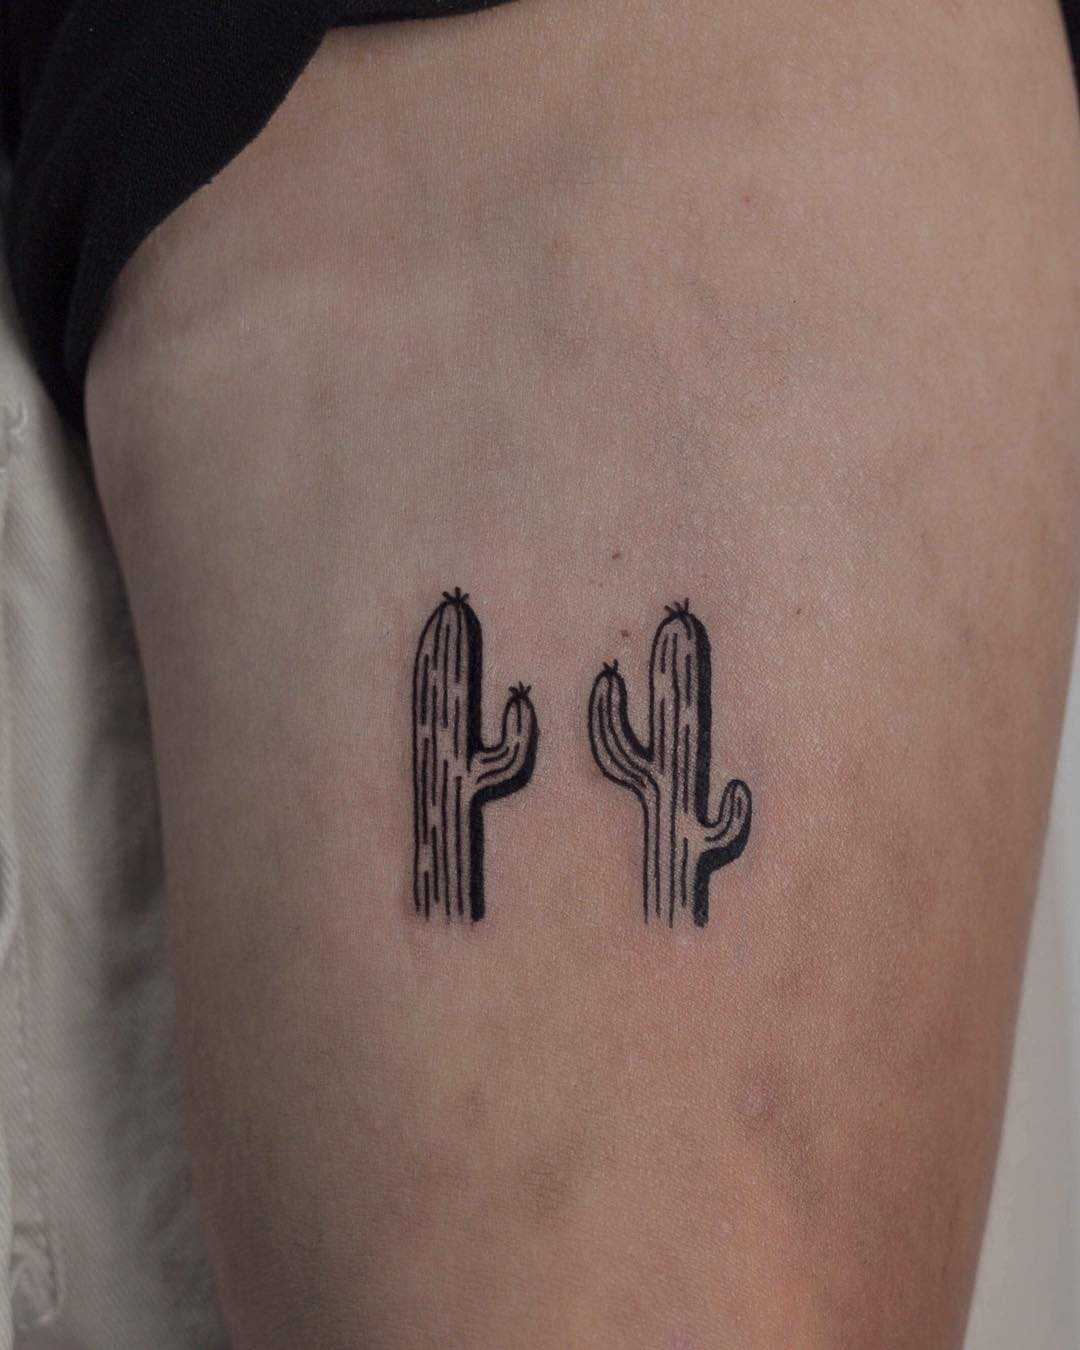 Two cacti by tattooist Bongkee